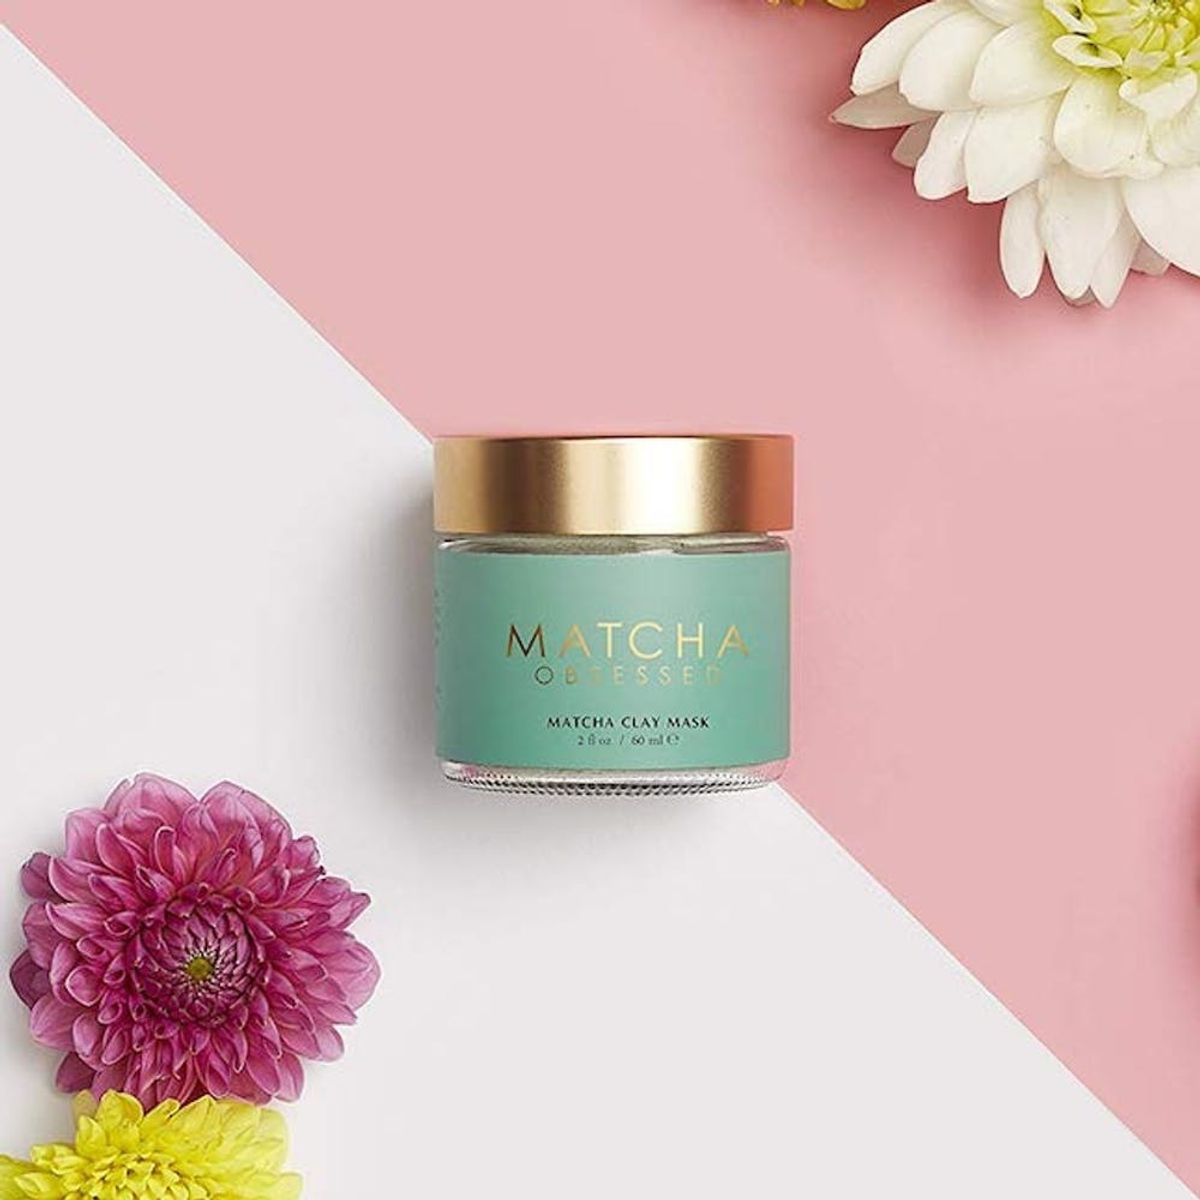 14 Beauty Products to Get the Most Out of Self-Care Sunday